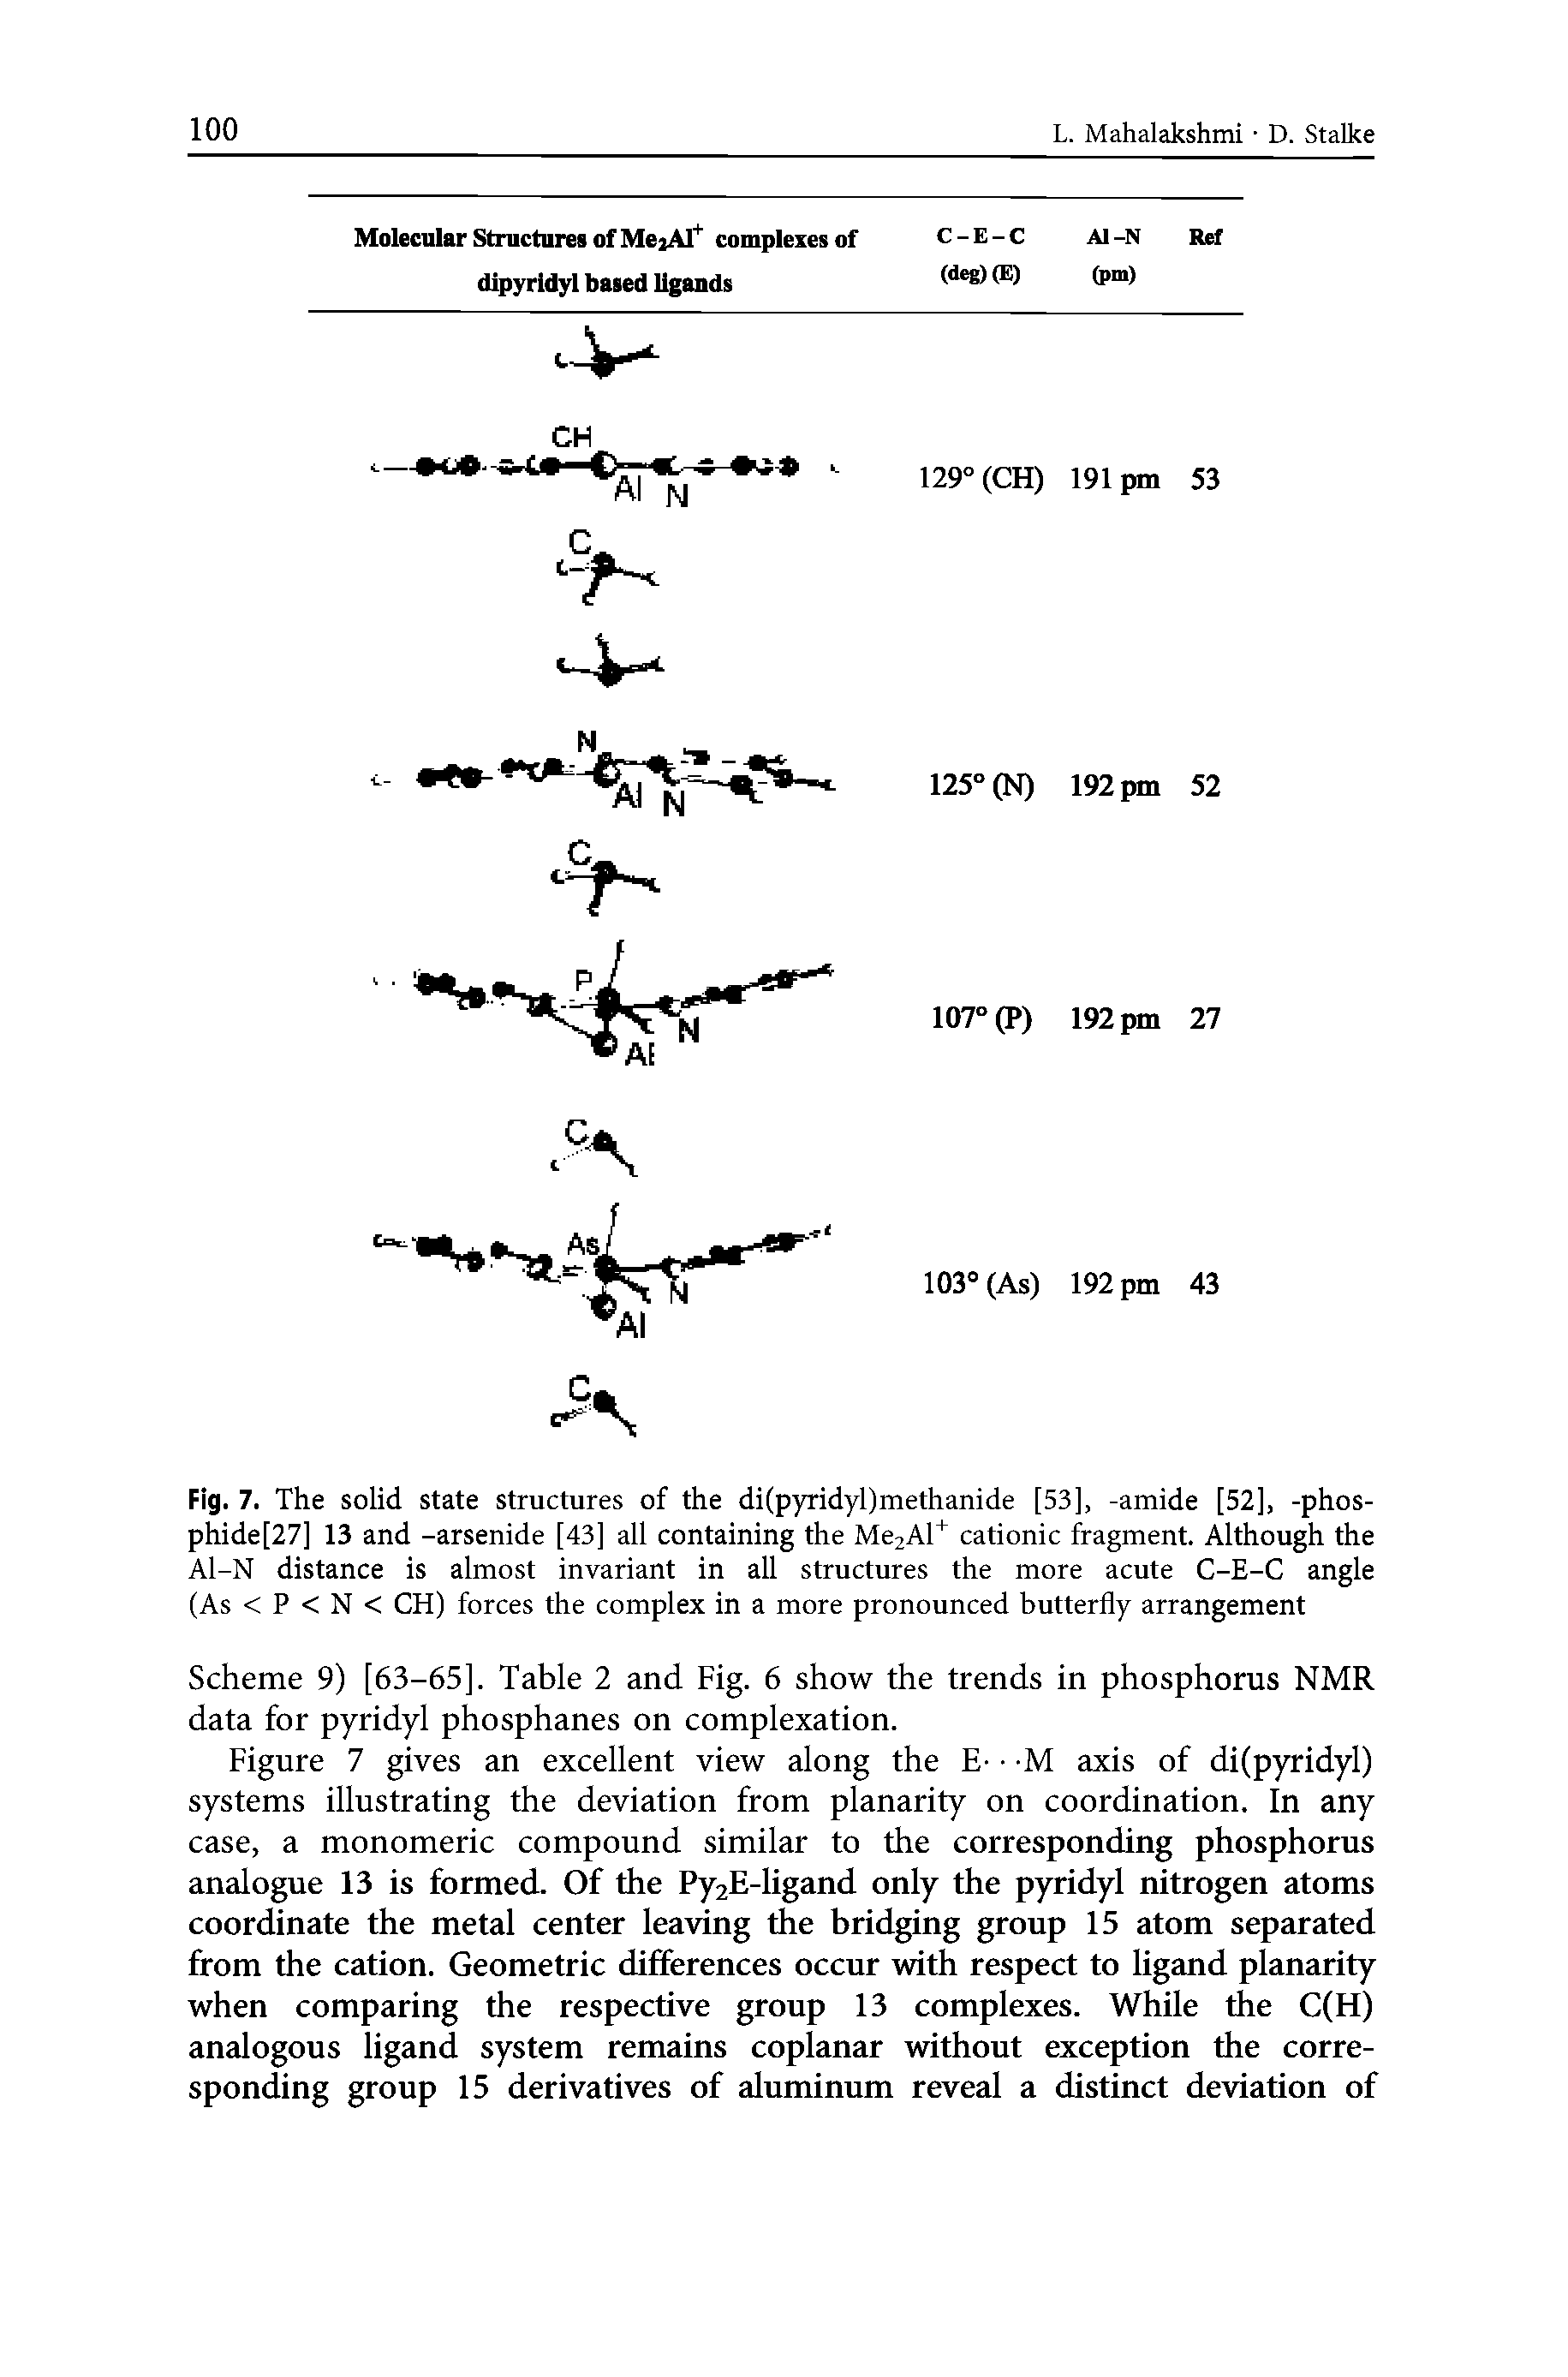 Scheme 9) [63-65], Table 2 and Fig. 6 show the trends in phosphorus NMR data for pyridyl phosphanes on complexation.